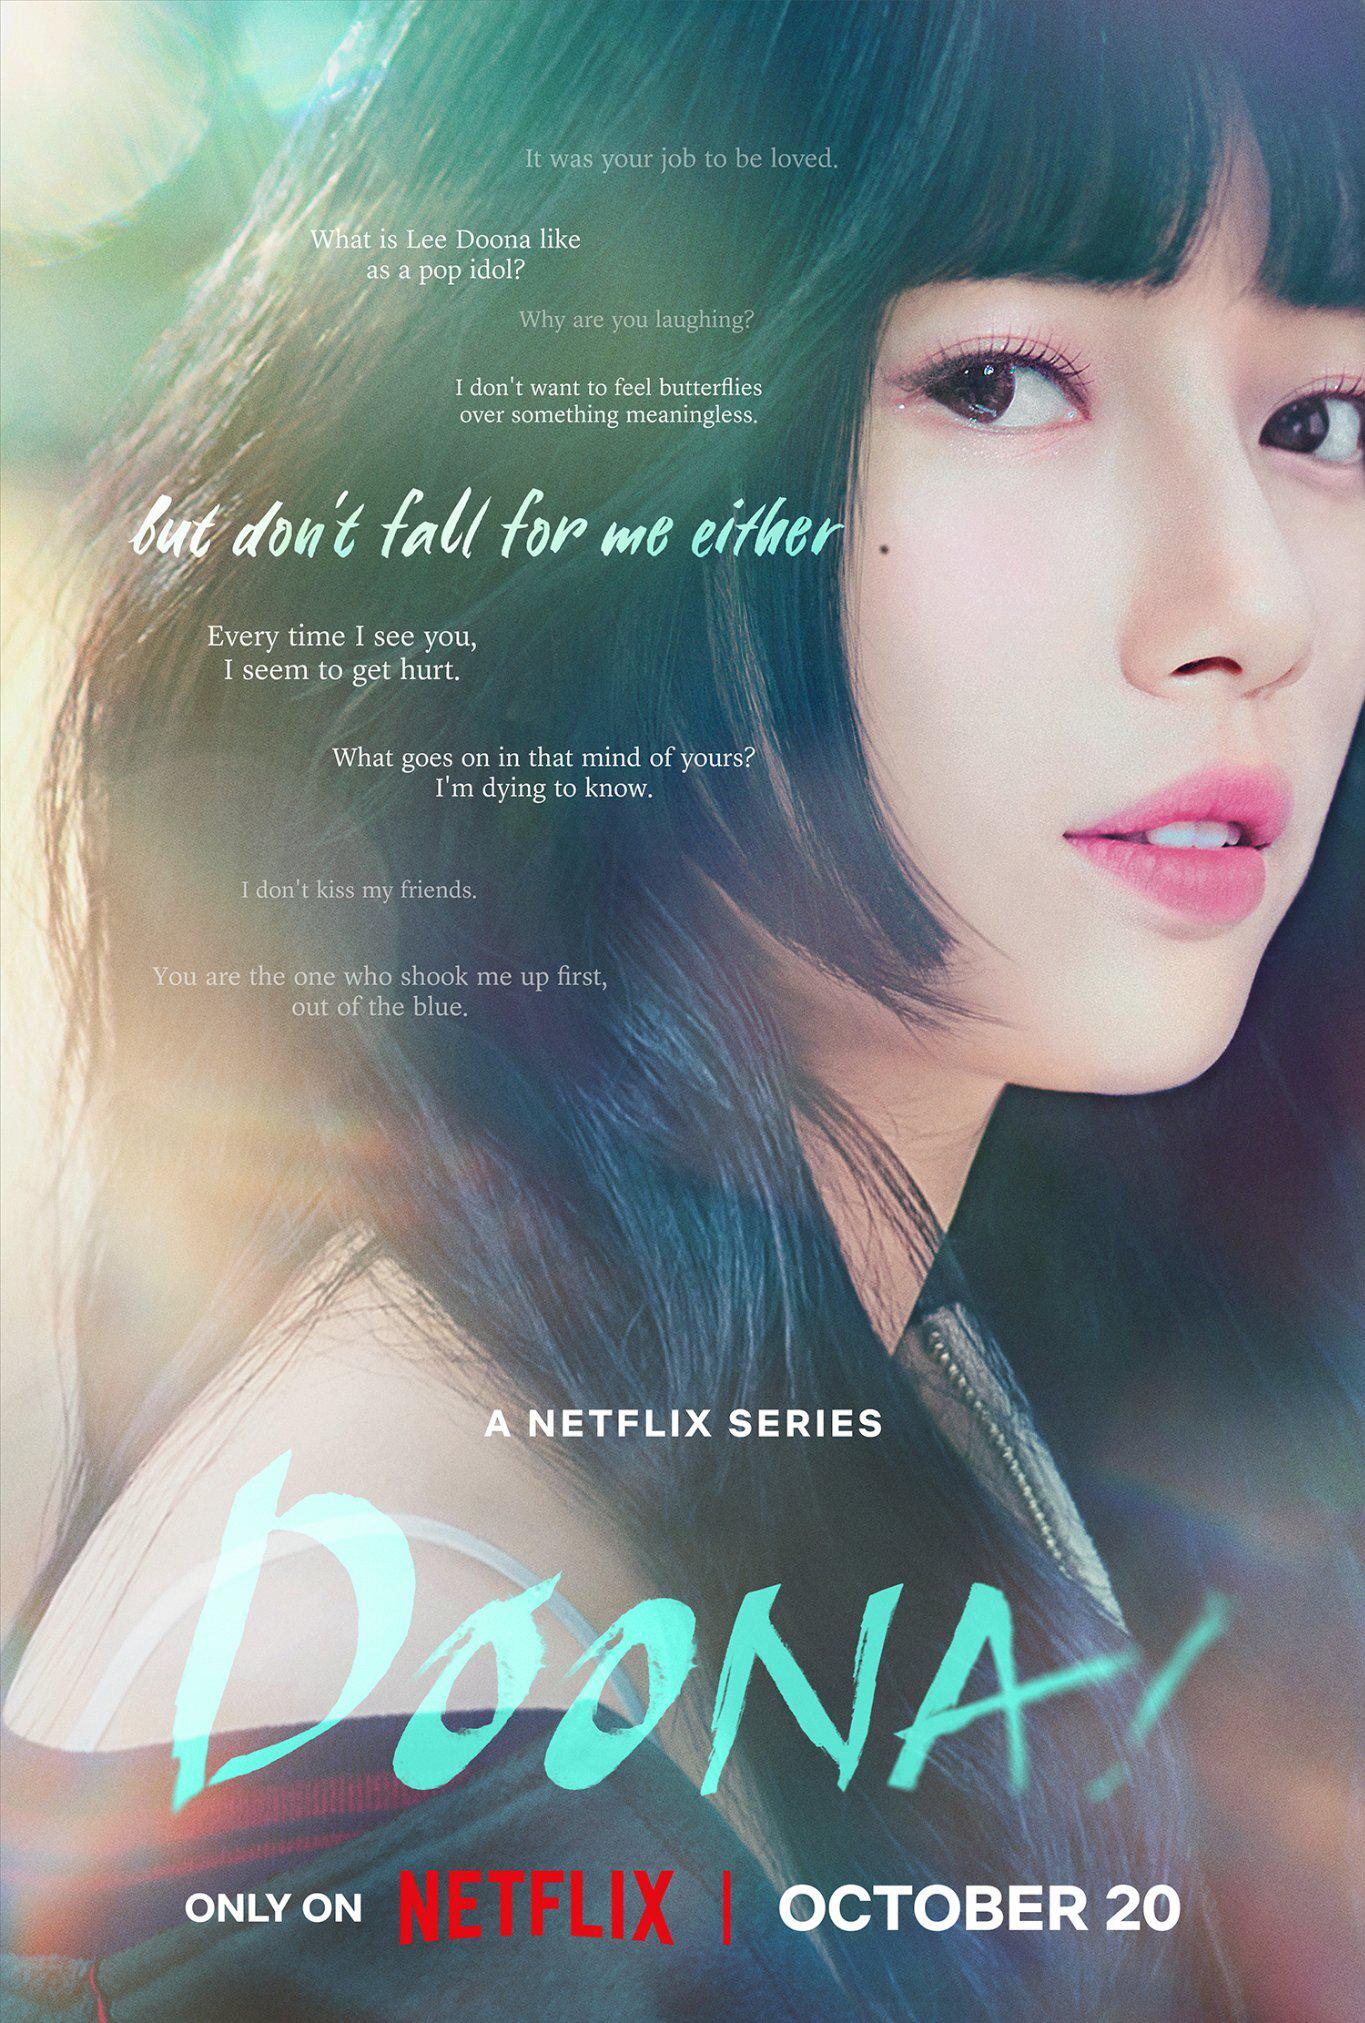 Netflix - One time, Bae Doona stepped on me and it was